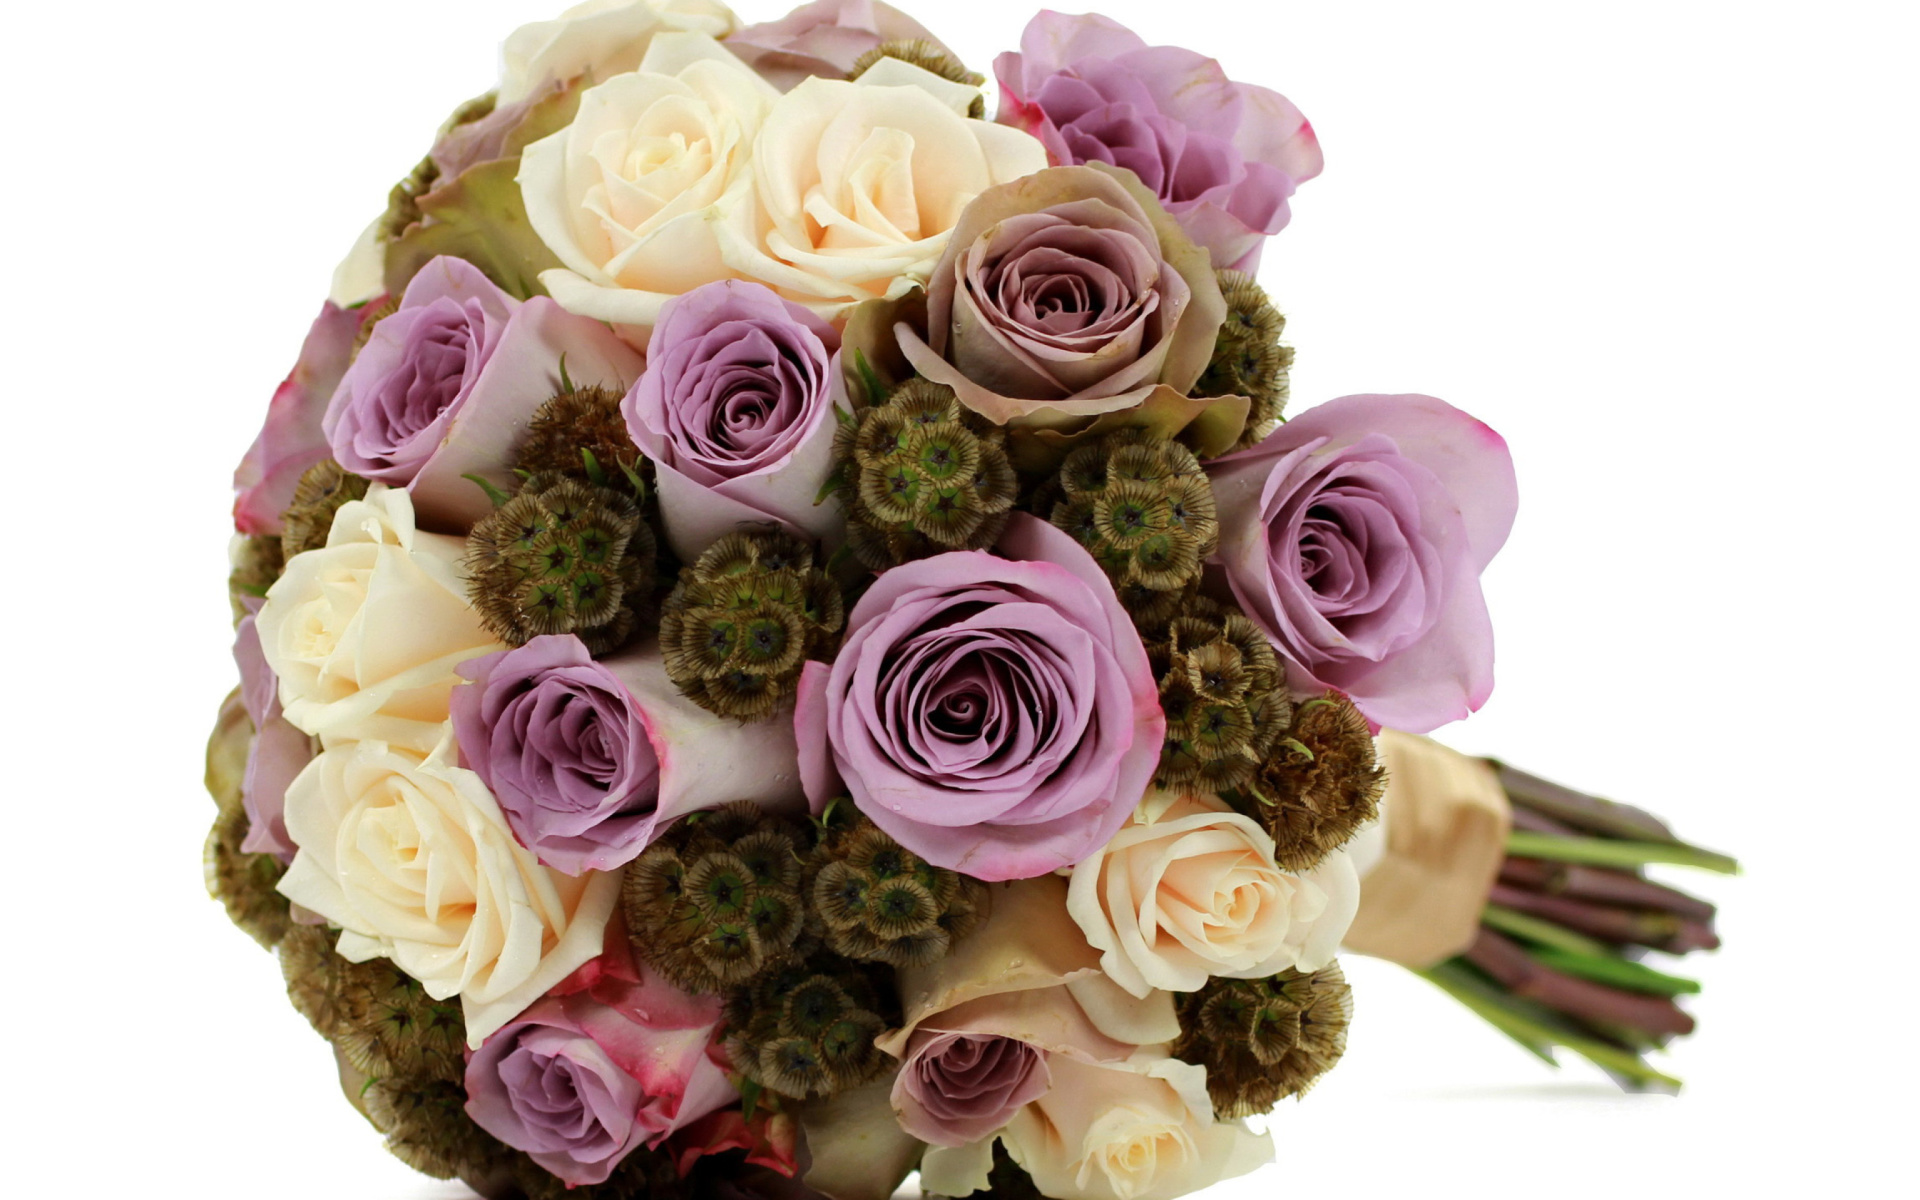 Das Bouquet with lilac roses Wallpaper 1920x1200